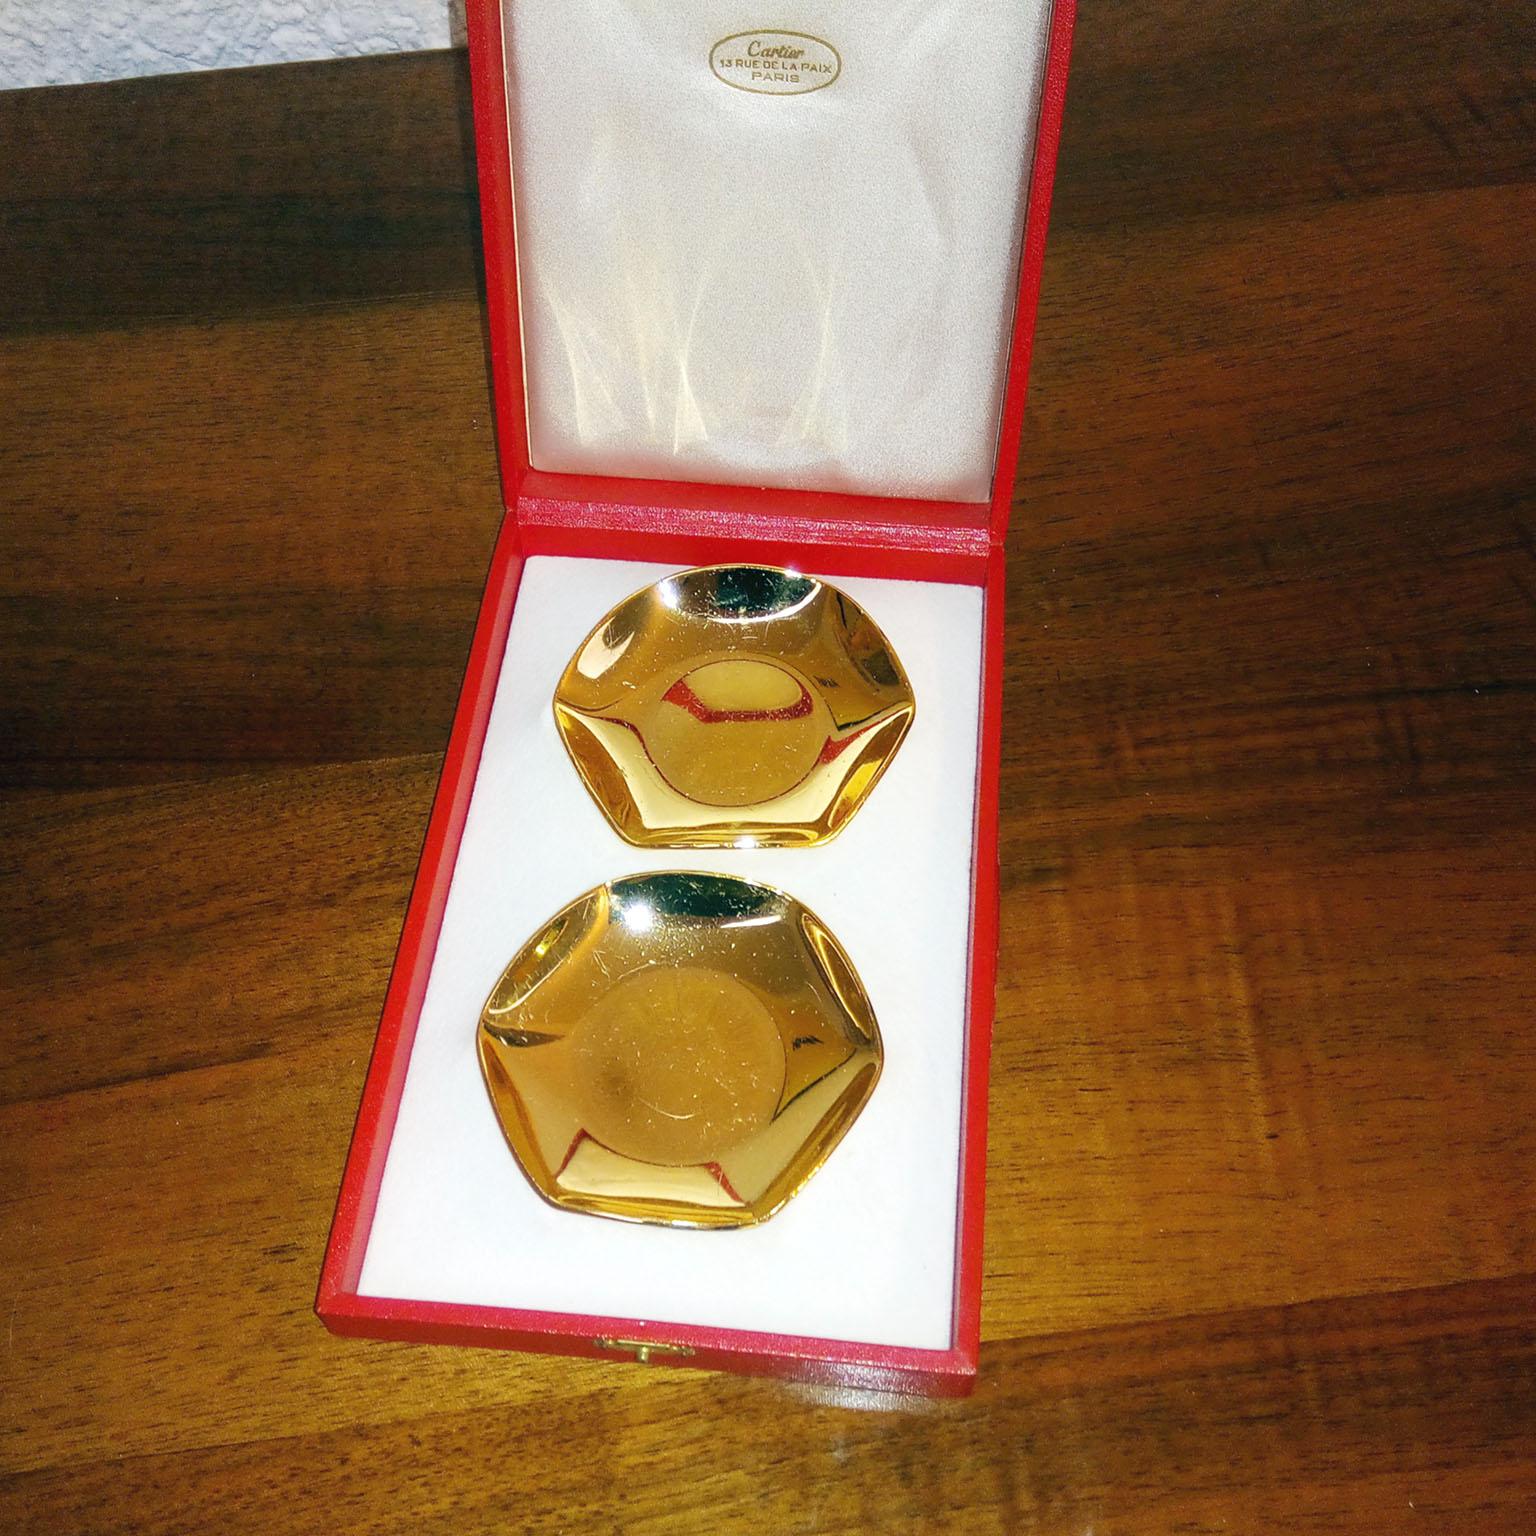 A nice pair of gold-plated small coupes by Cartier, in their original box.
Excellent for jewelries, sweets or any other small items.
Dimensions: 
Box 20 x 13 x 3.2 cm (7.87 x 5.11 x 1.25 in.)
Coupe diameter 8.5 cm (3.34 in.), High 1.5 cm (0.6